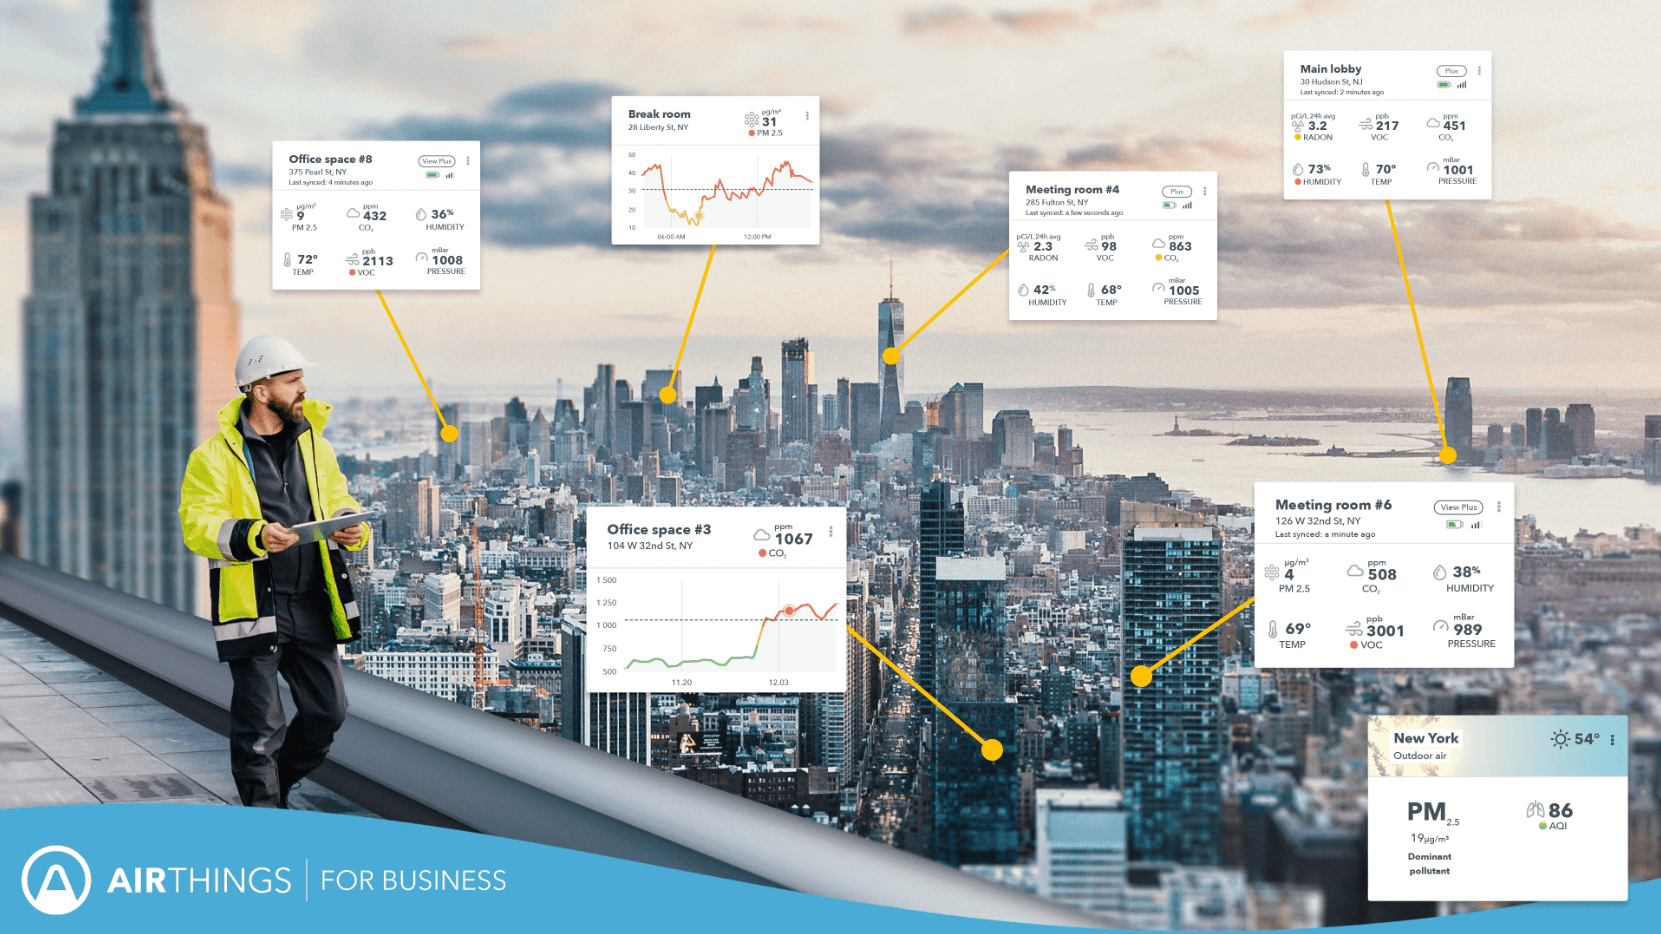 Airthings-for-Business-Facility-manager-Multiple-locations-monitoring-Dashboard-New-York-skyline-WEB (1)